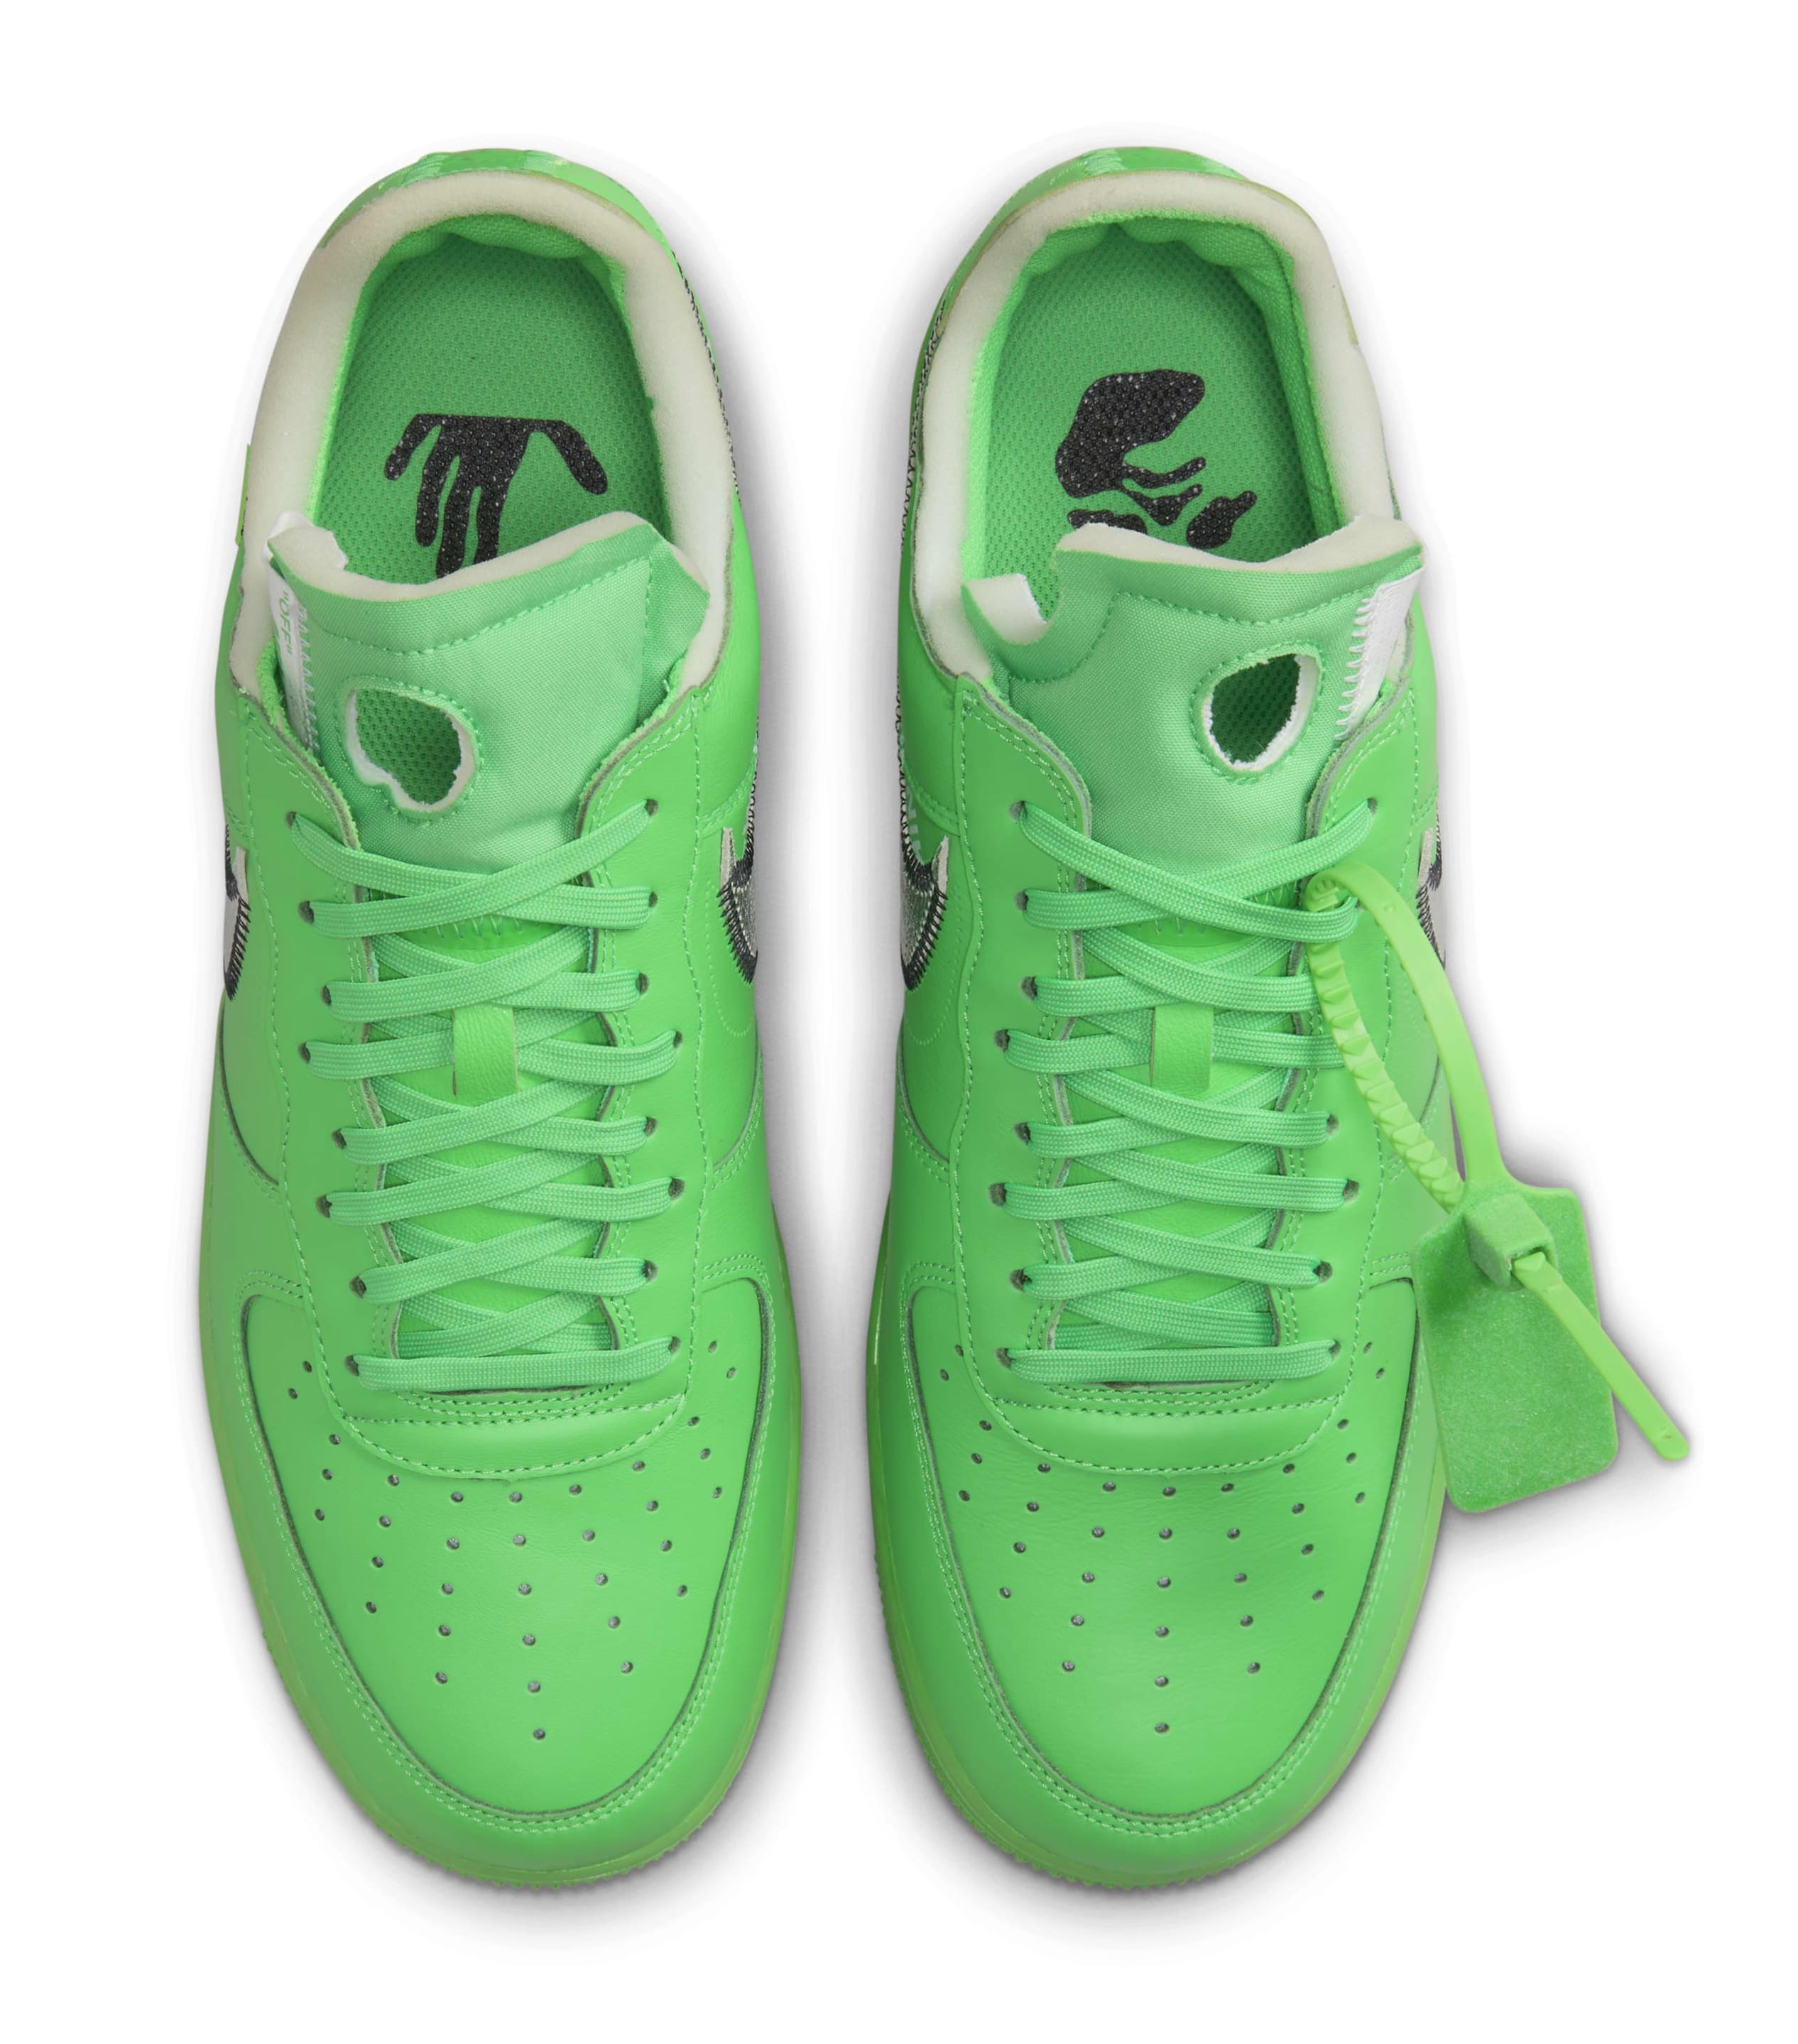 Green Spark' Off-White x Nike Air Force 1s Release Next Week